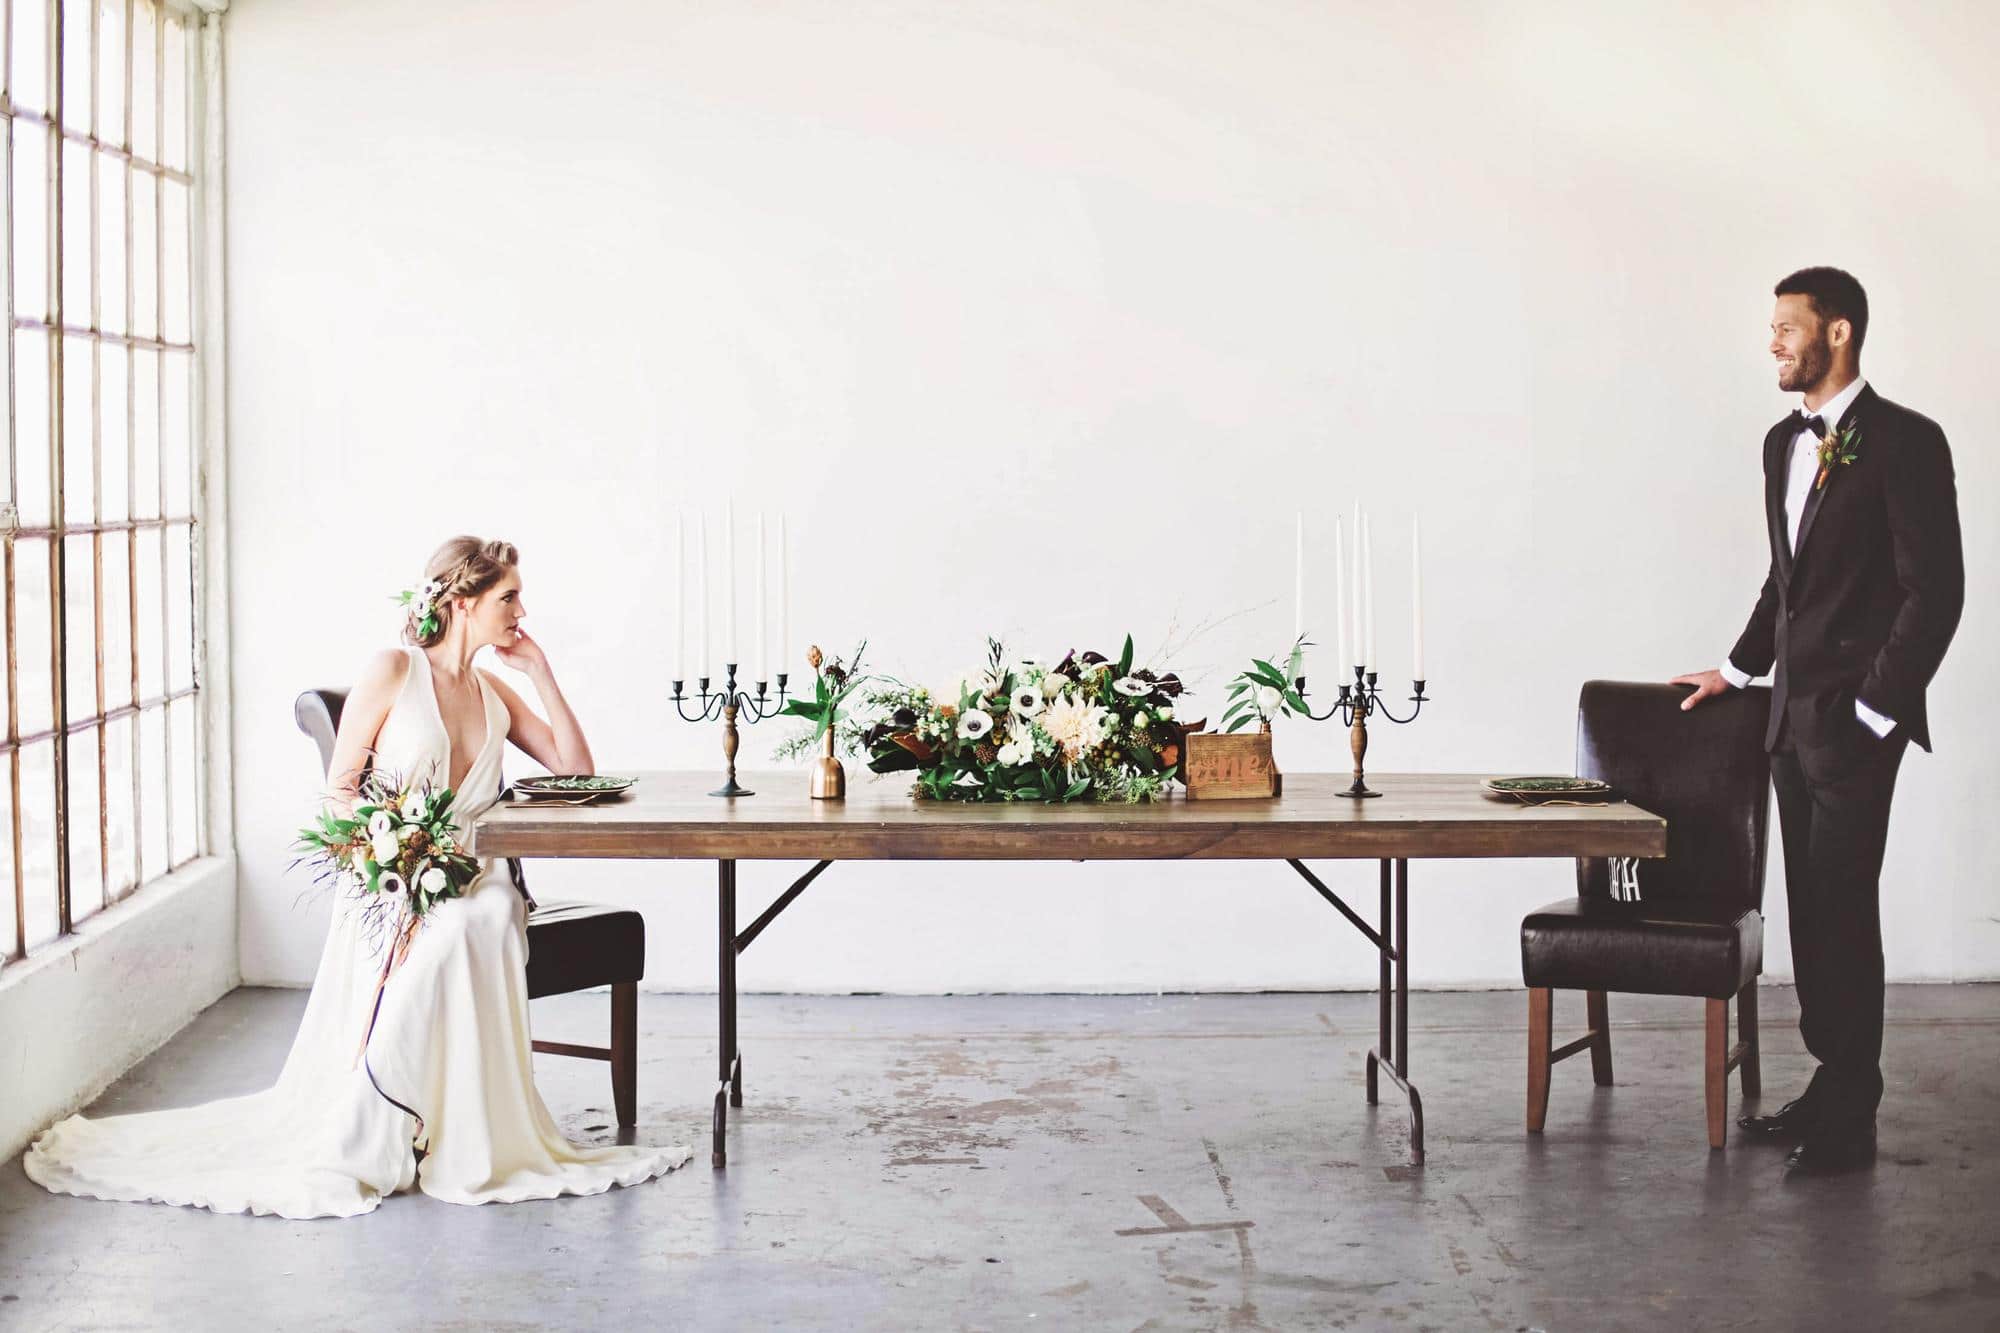 View More: http://thekatiejanephoto.pass.us/industrial-elegance-copper-styledshoot